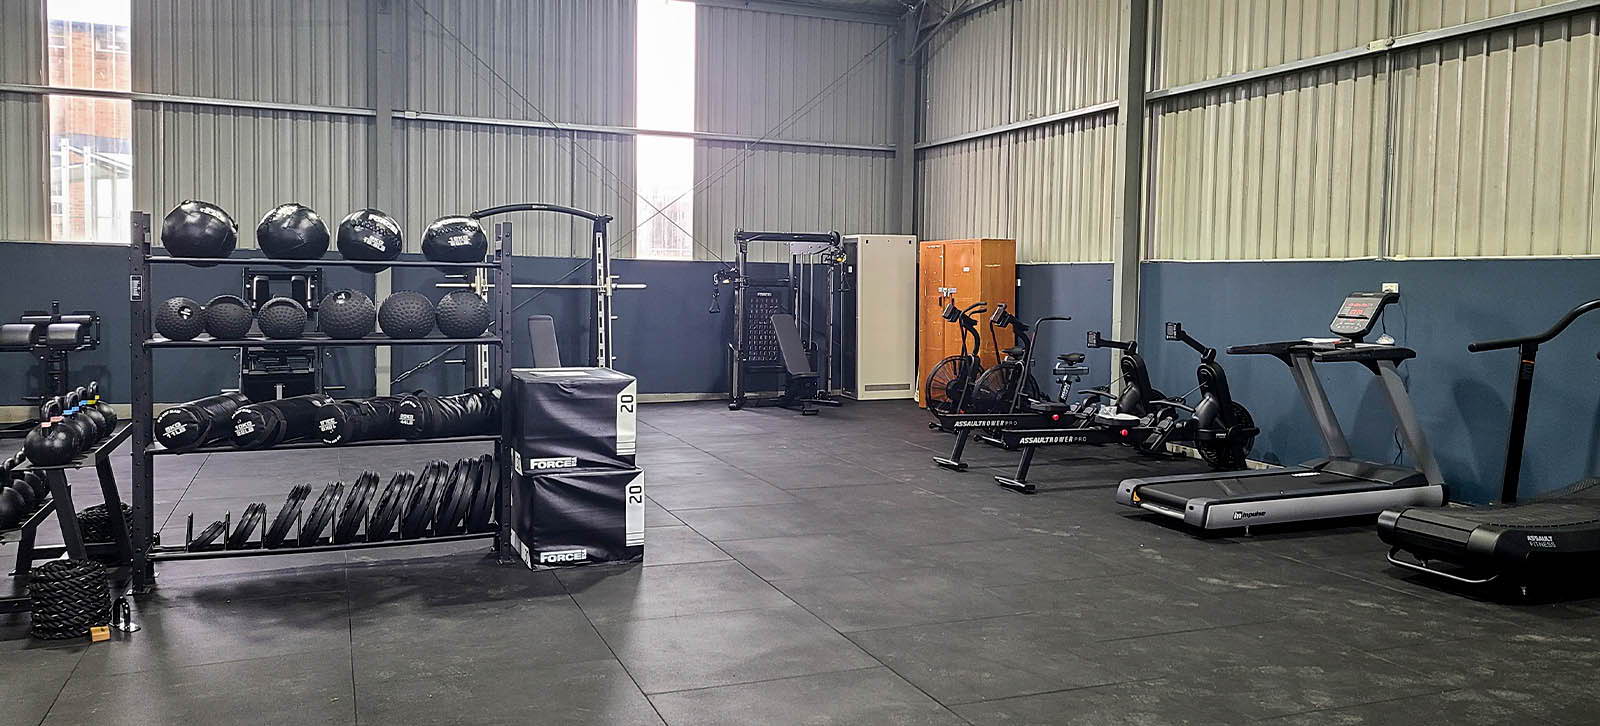 High School Gym Fit Out at Monaro School featuring a diverse range of cardio machines and free weights in a spacious, well-lit area.